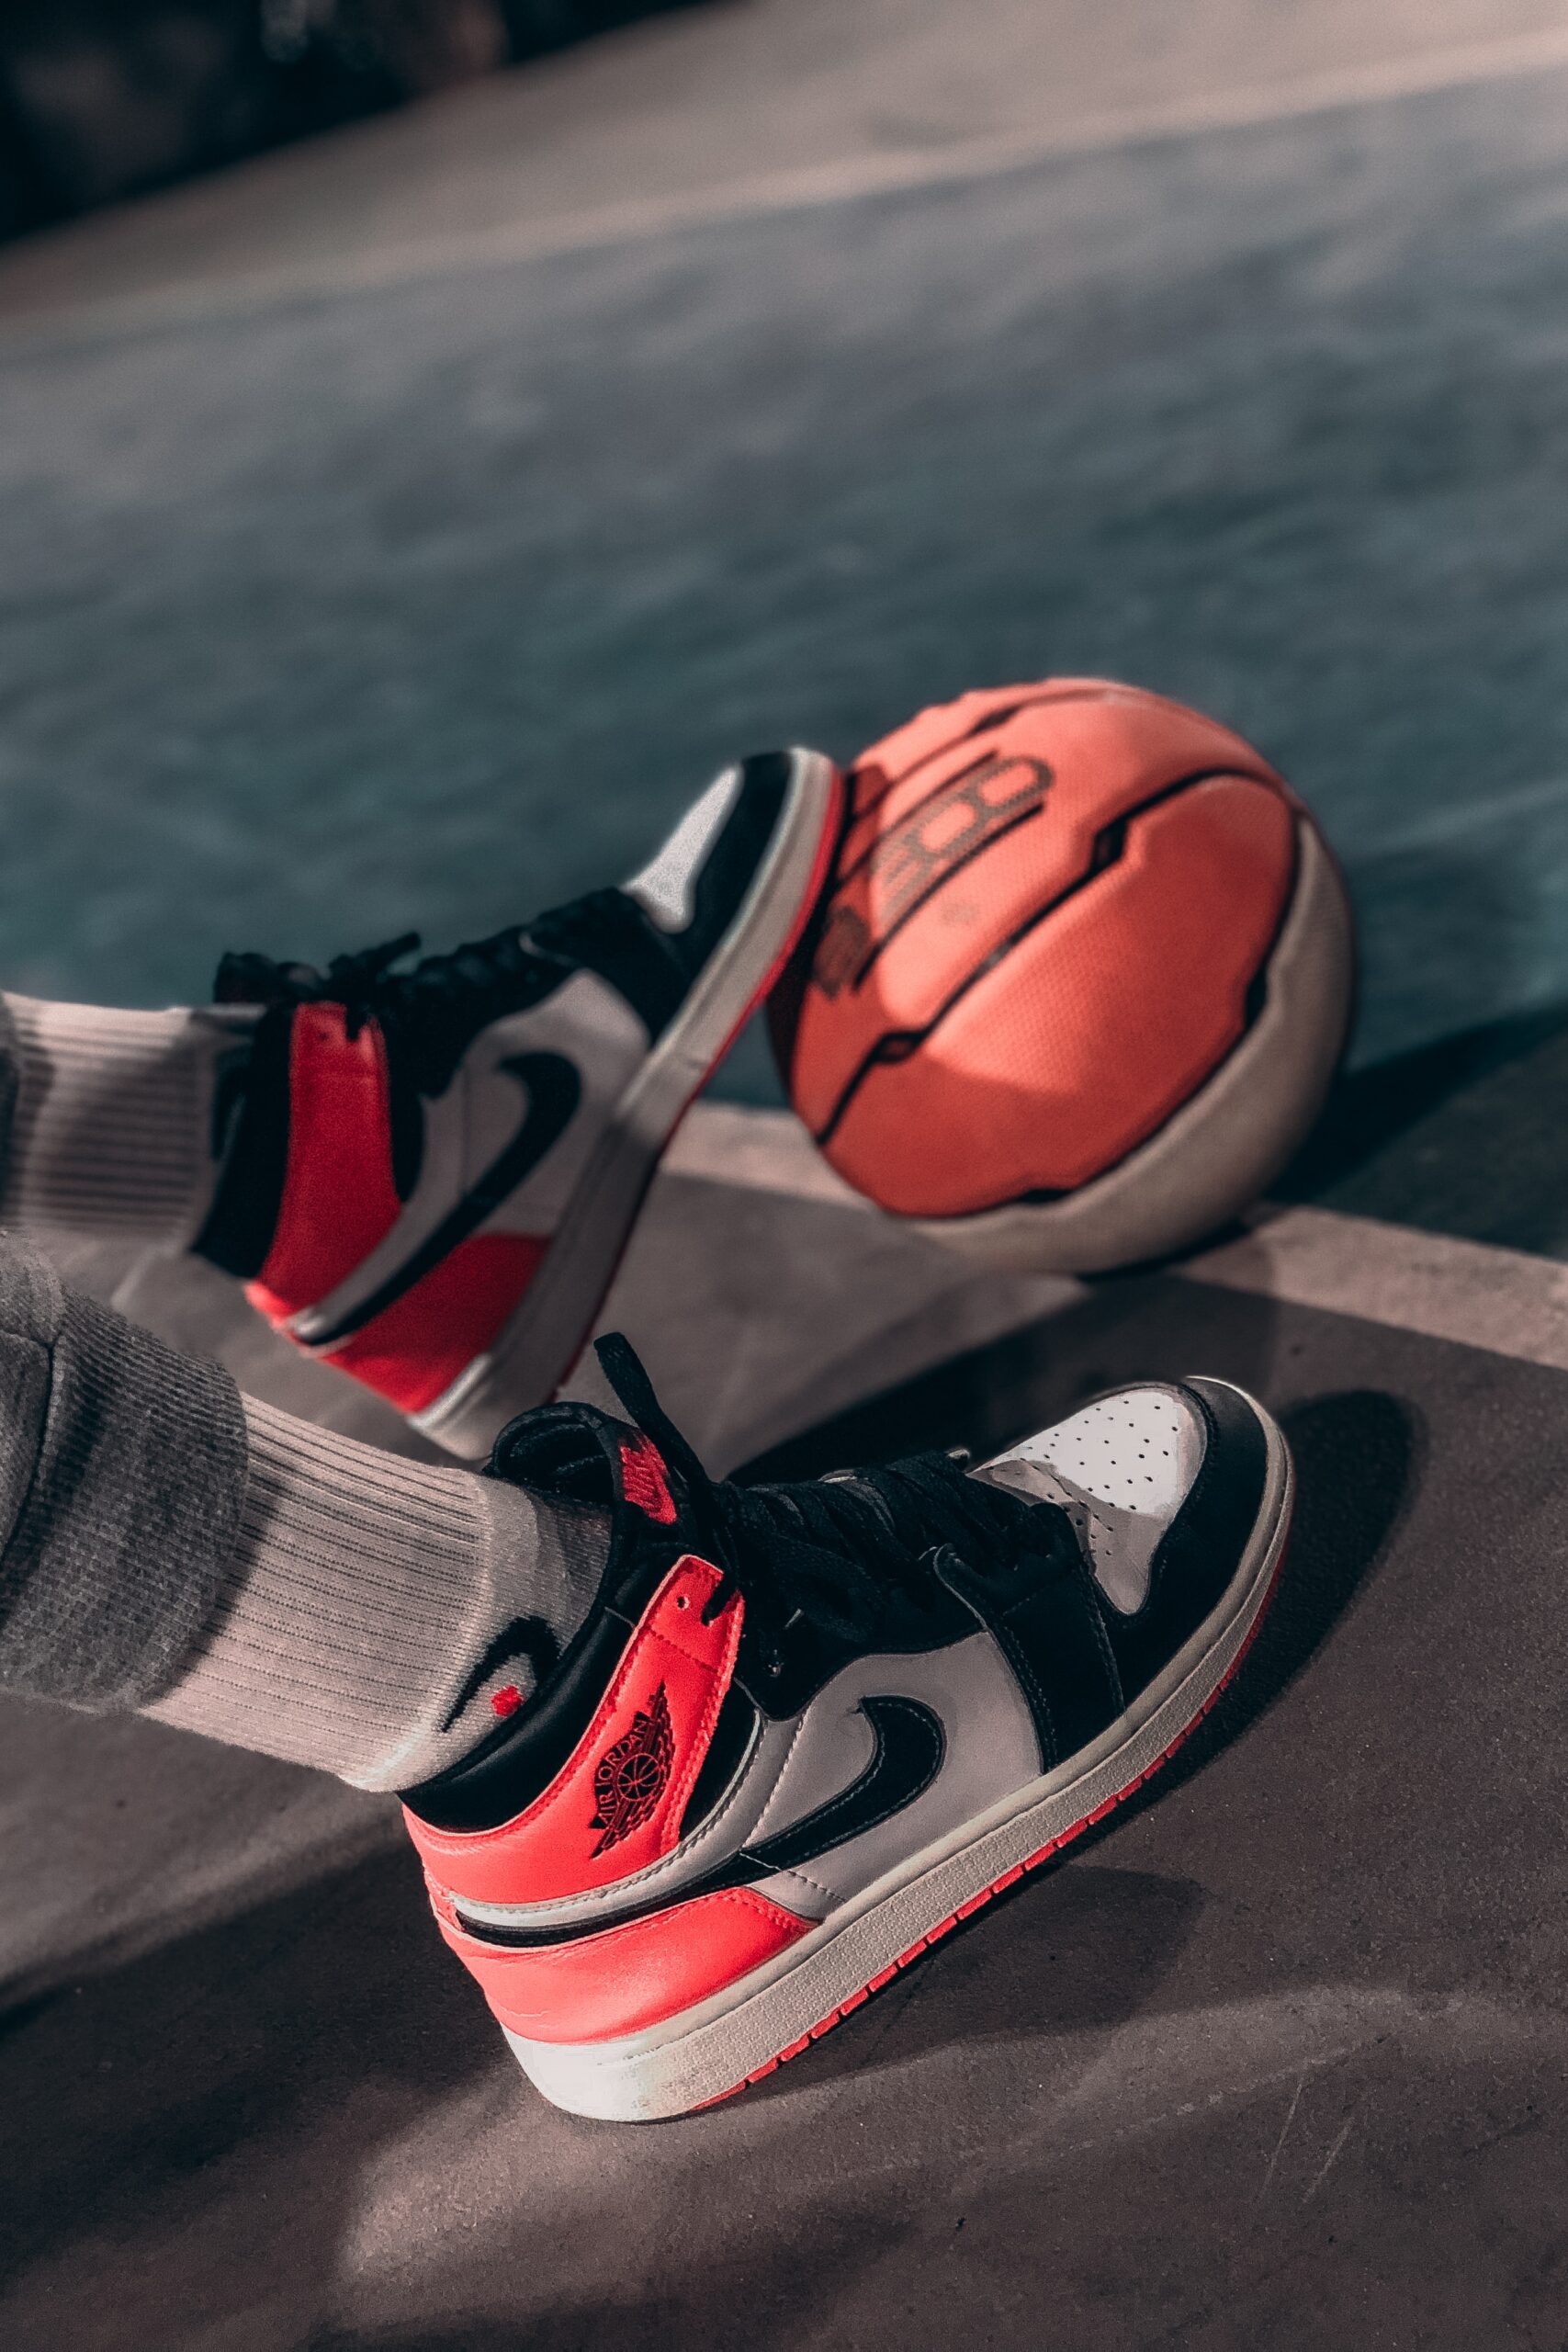 Tips for Selecting Outdoor Basketball Shoes